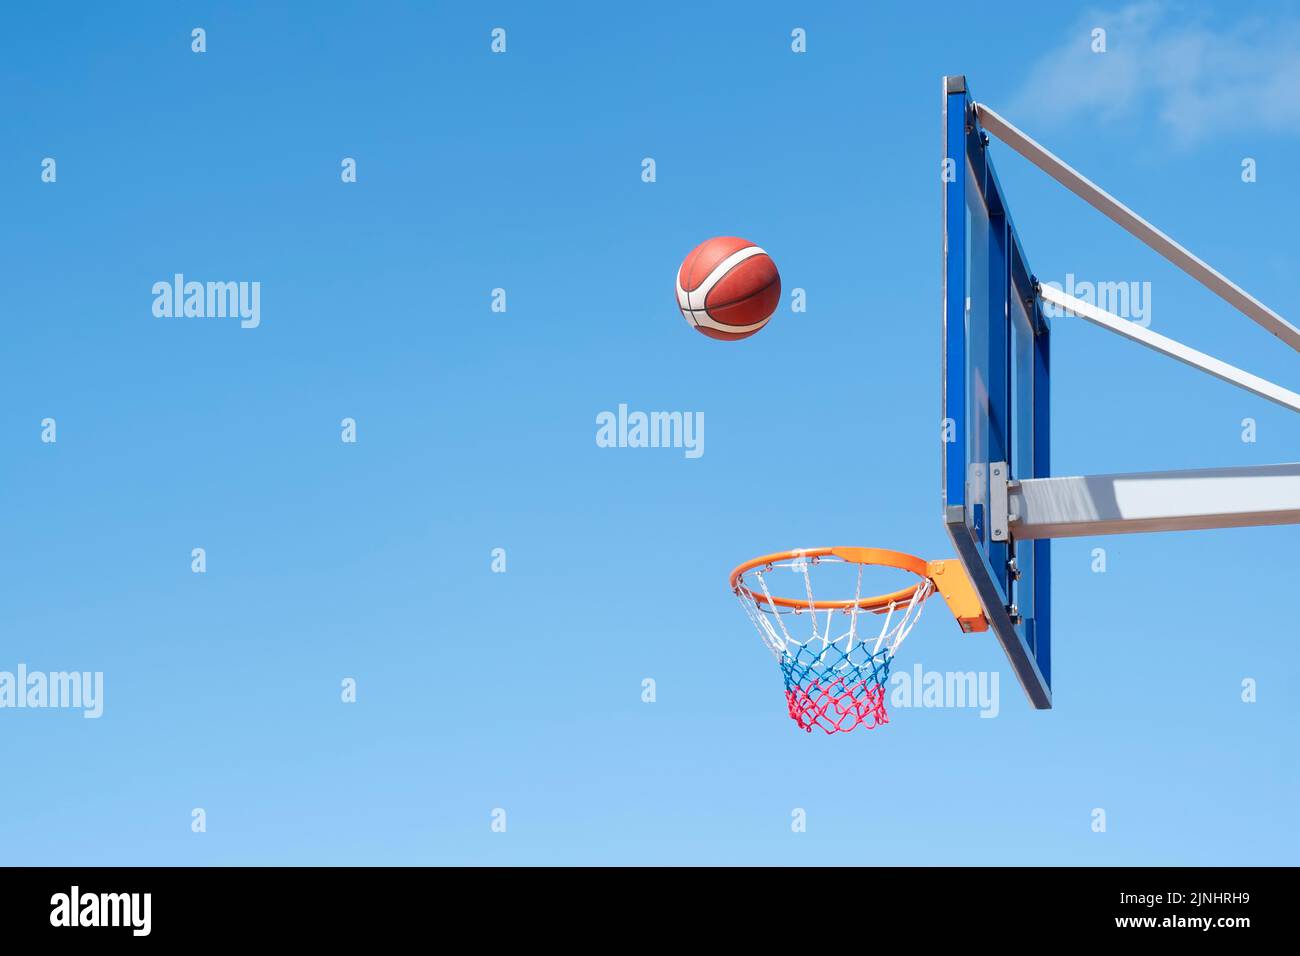 basketball in a net on a blue sky background. The ball hit the ring. Sports, team game. Conceptual: victory, success, hitting the target, sport. Stock Photo